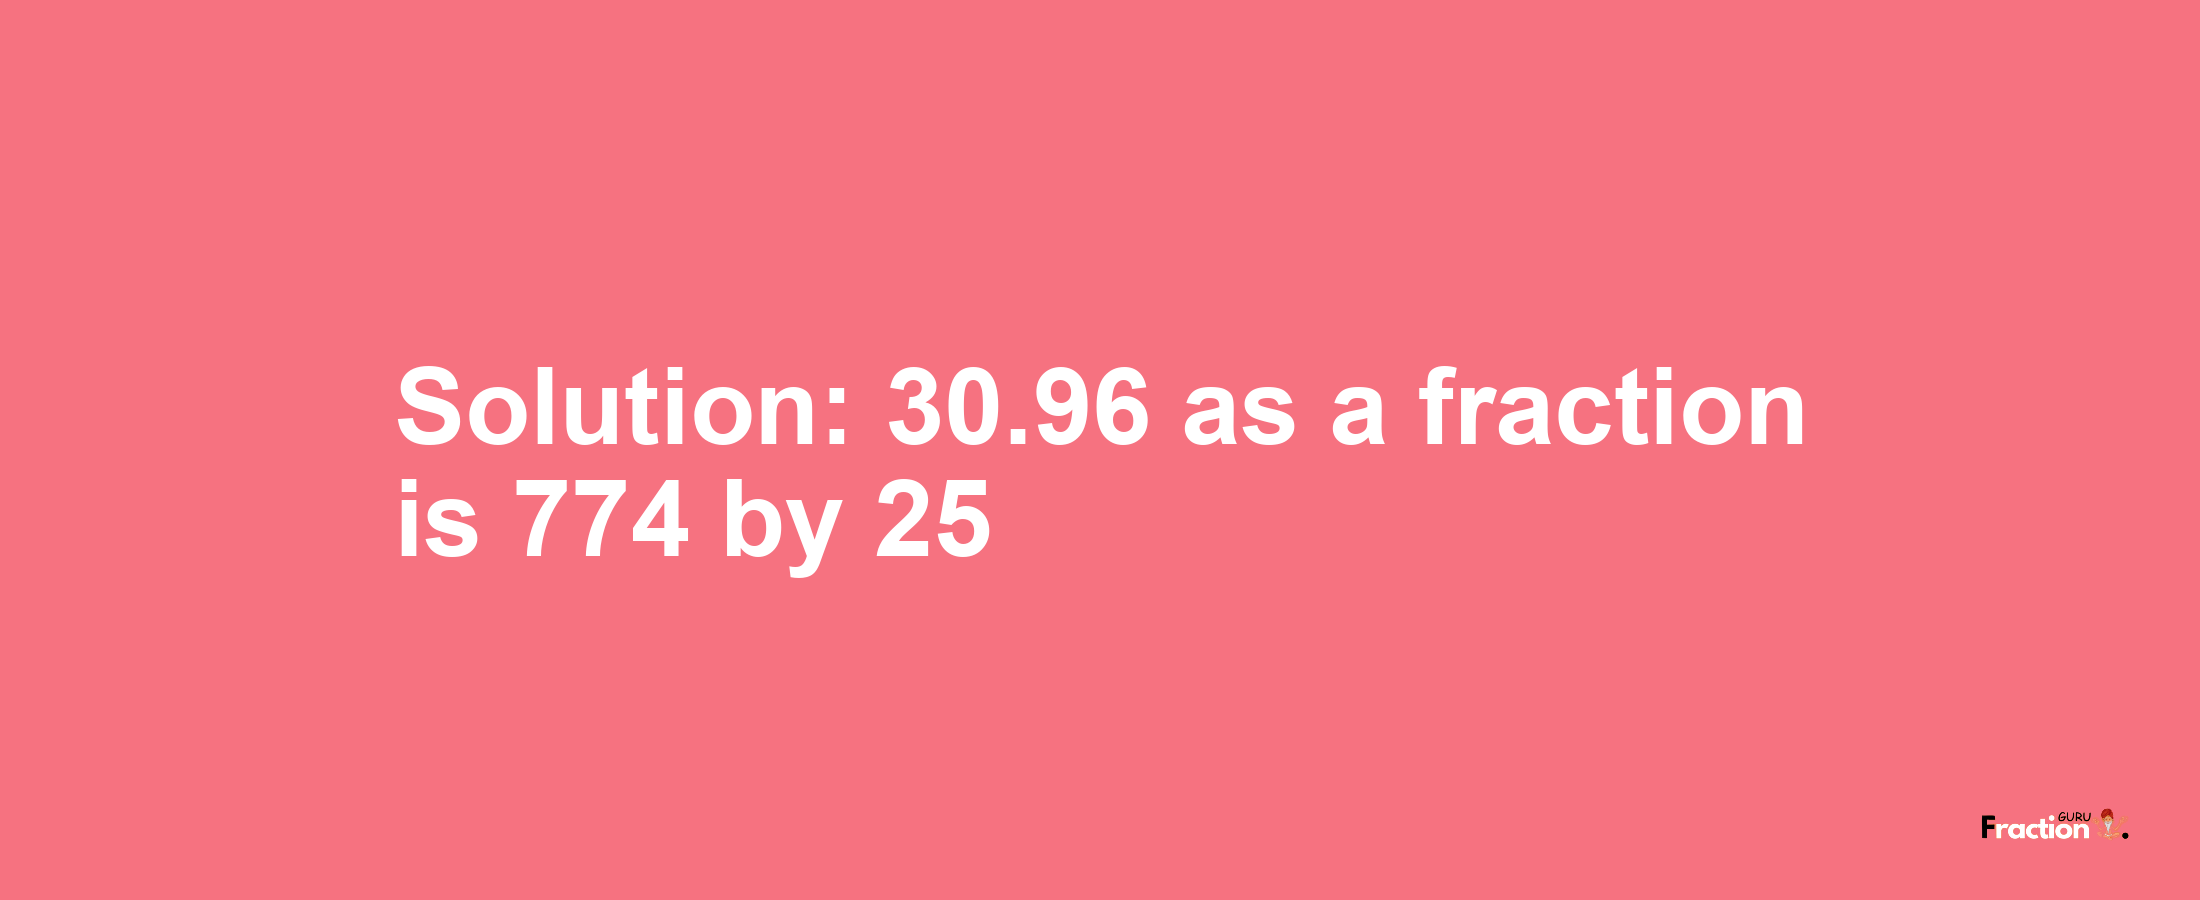 Solution:30.96 as a fraction is 774/25